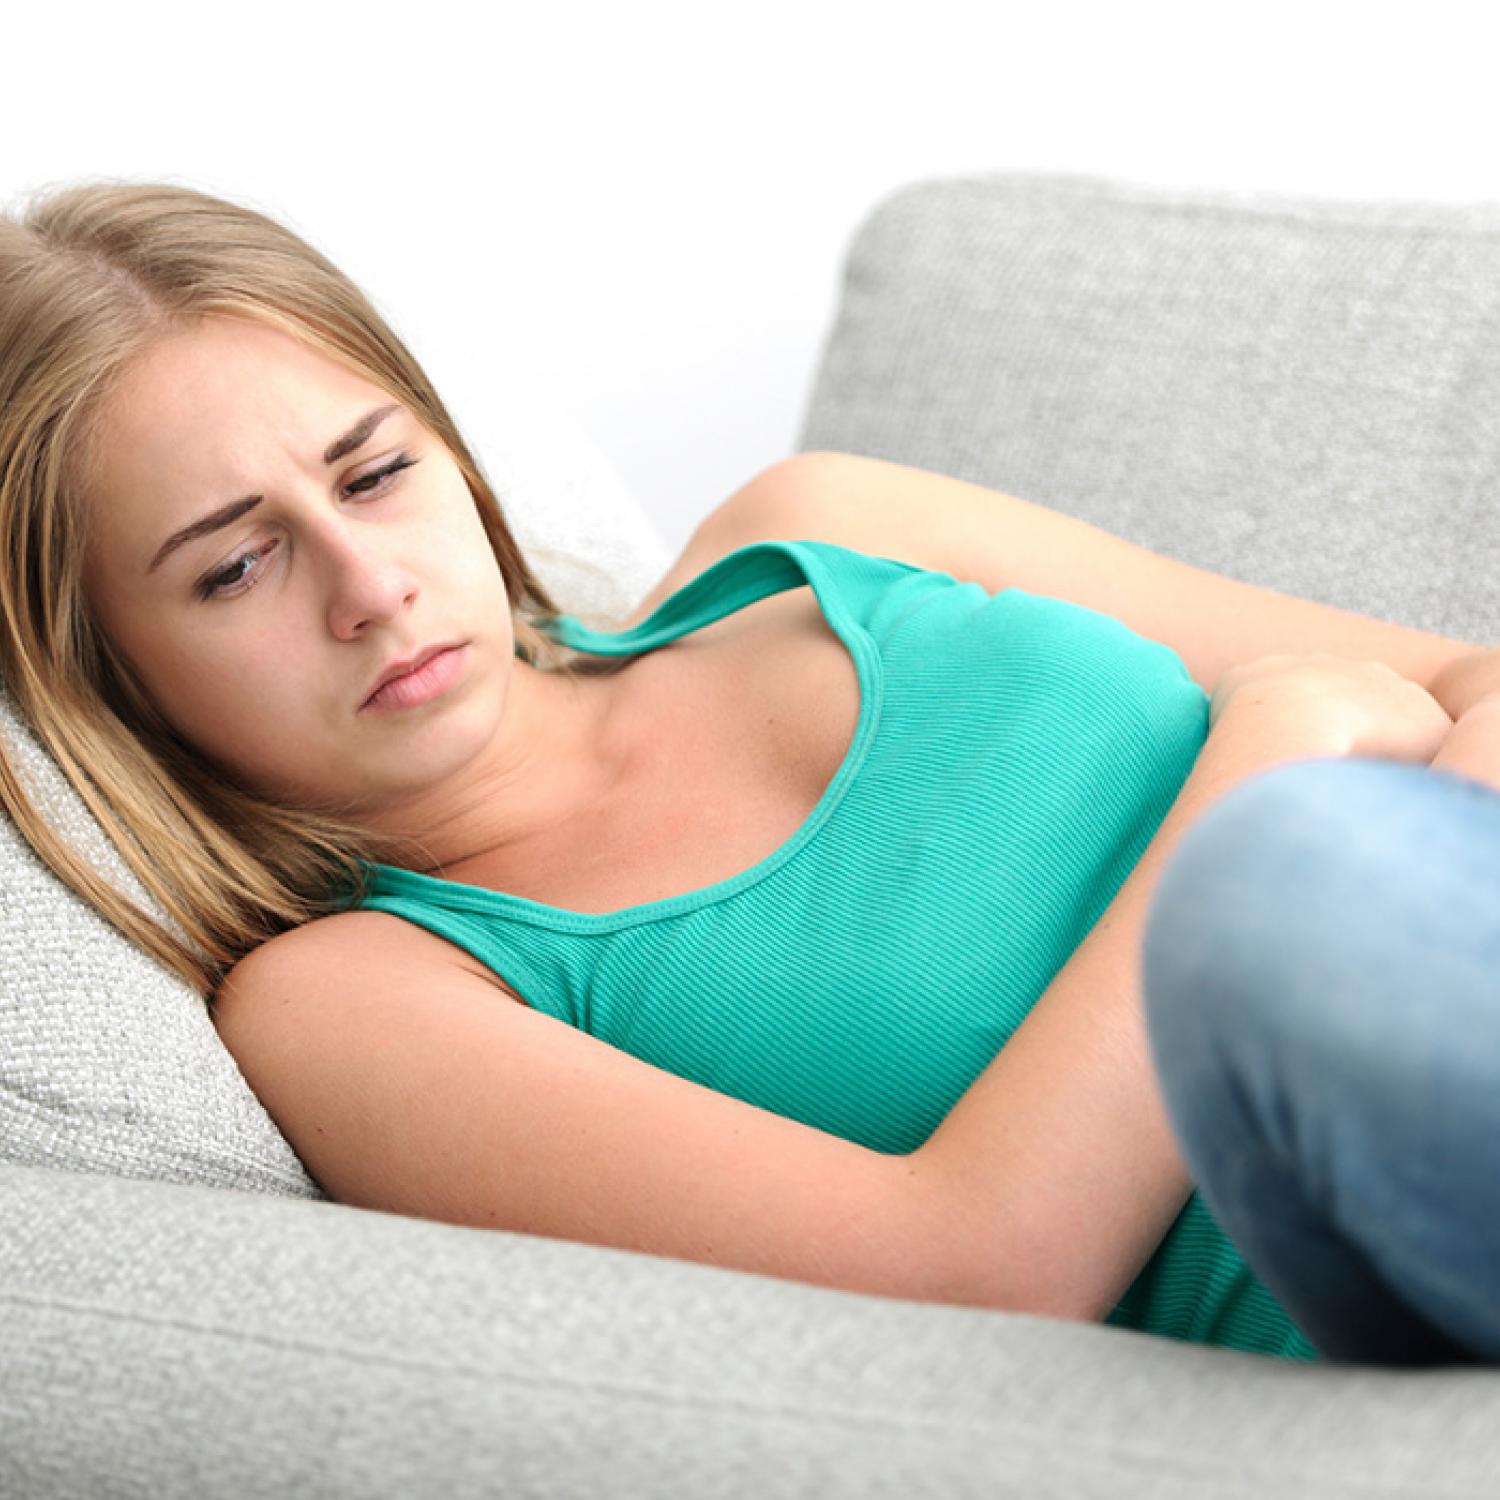 Threatened Miscarriage: Causes & Treatments